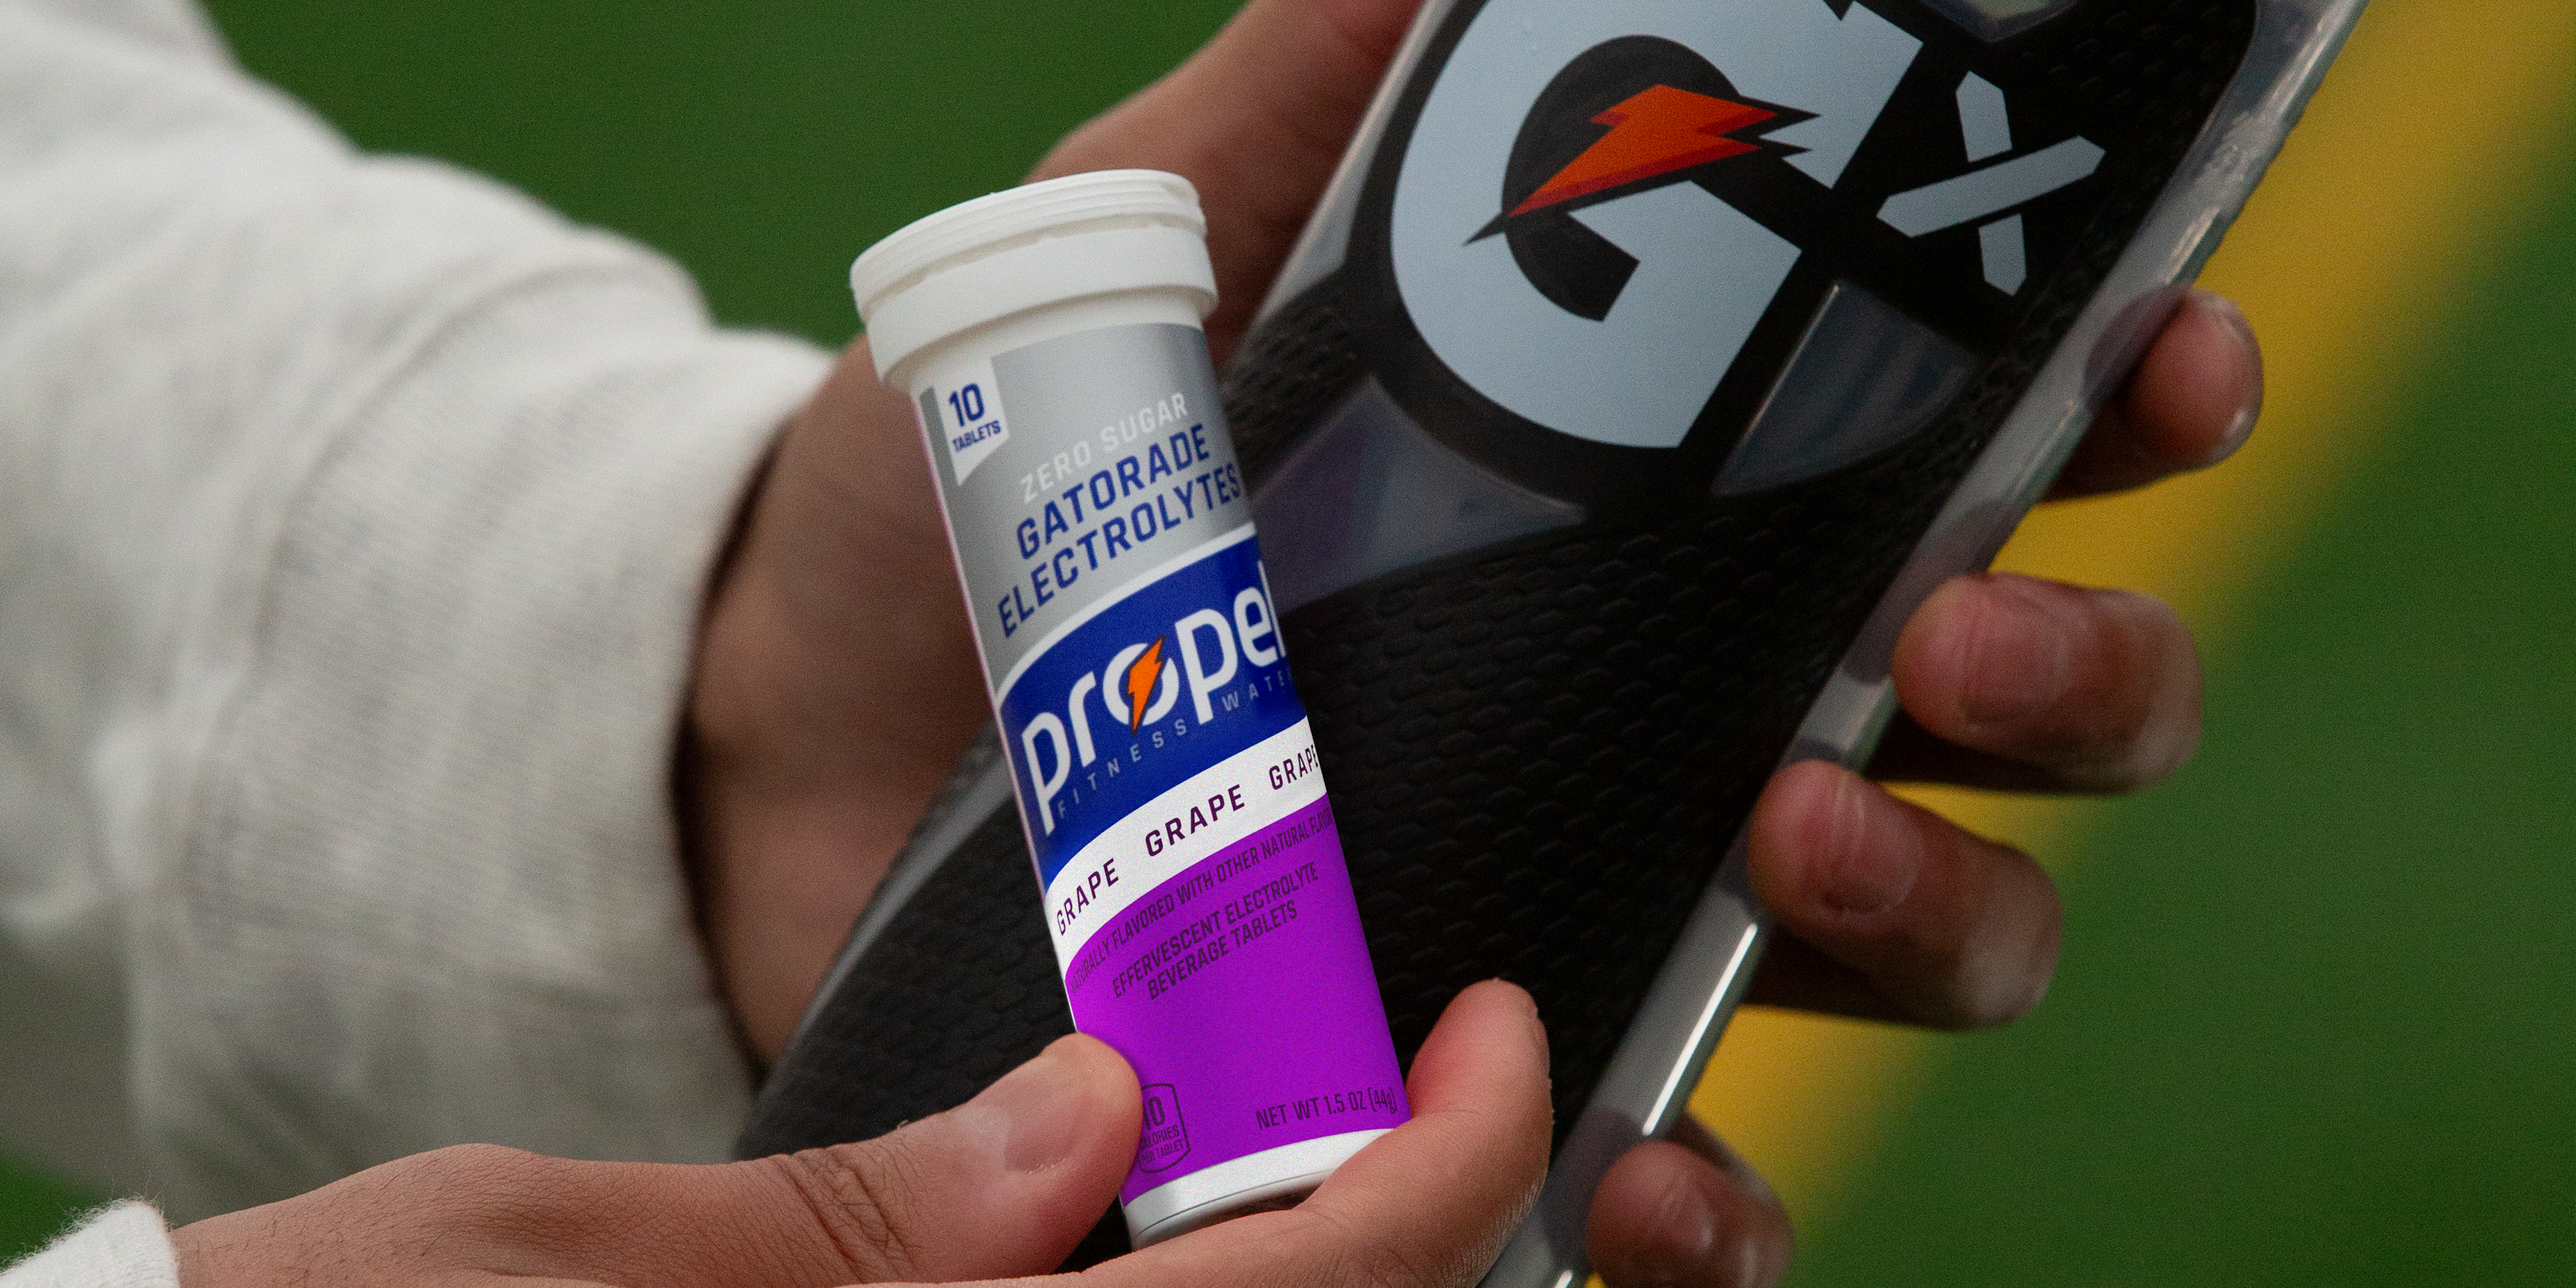 Propel Tablet Grape pack with Gx Squeeze bottle in athlete's hands.